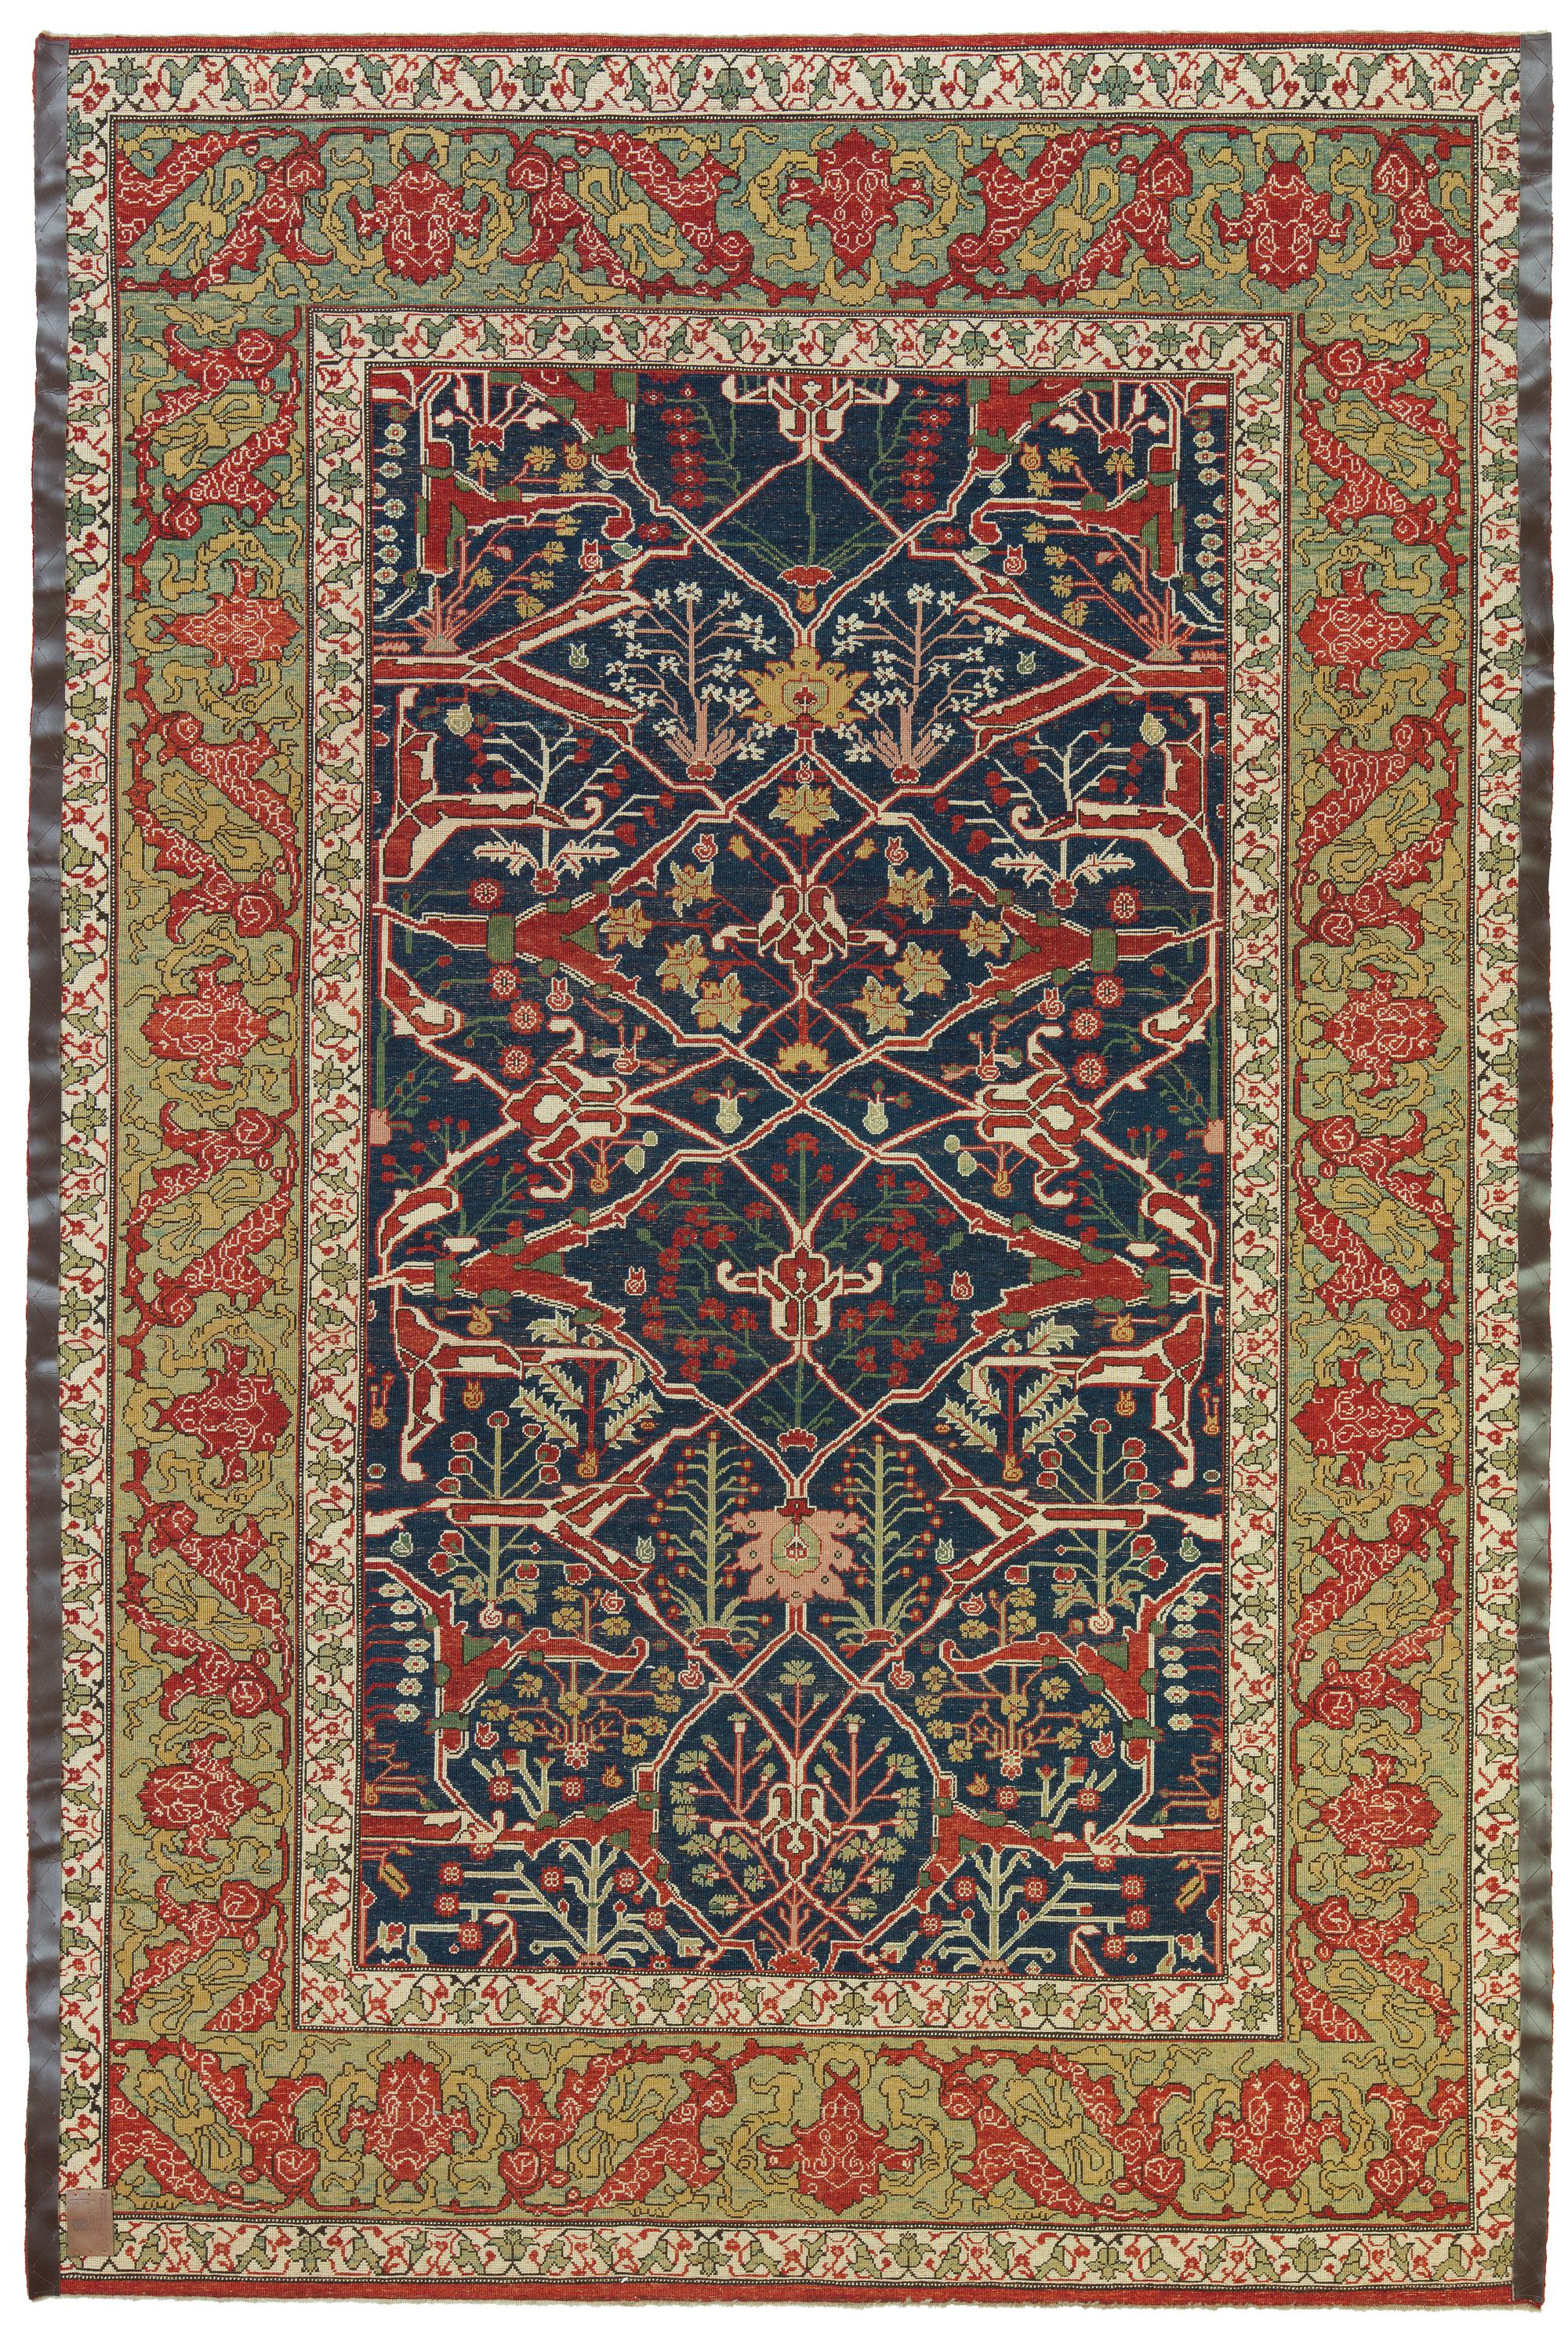 The source of the rug comes from the book Islamic carpets, Joseph V. McMullan, Near Eastern Art Research Center Inc., New York 1965 nr.22. This is a system of arabesque-designed 19th-century rugs from Gerous ( Garrus or Garus ) region, Eastern